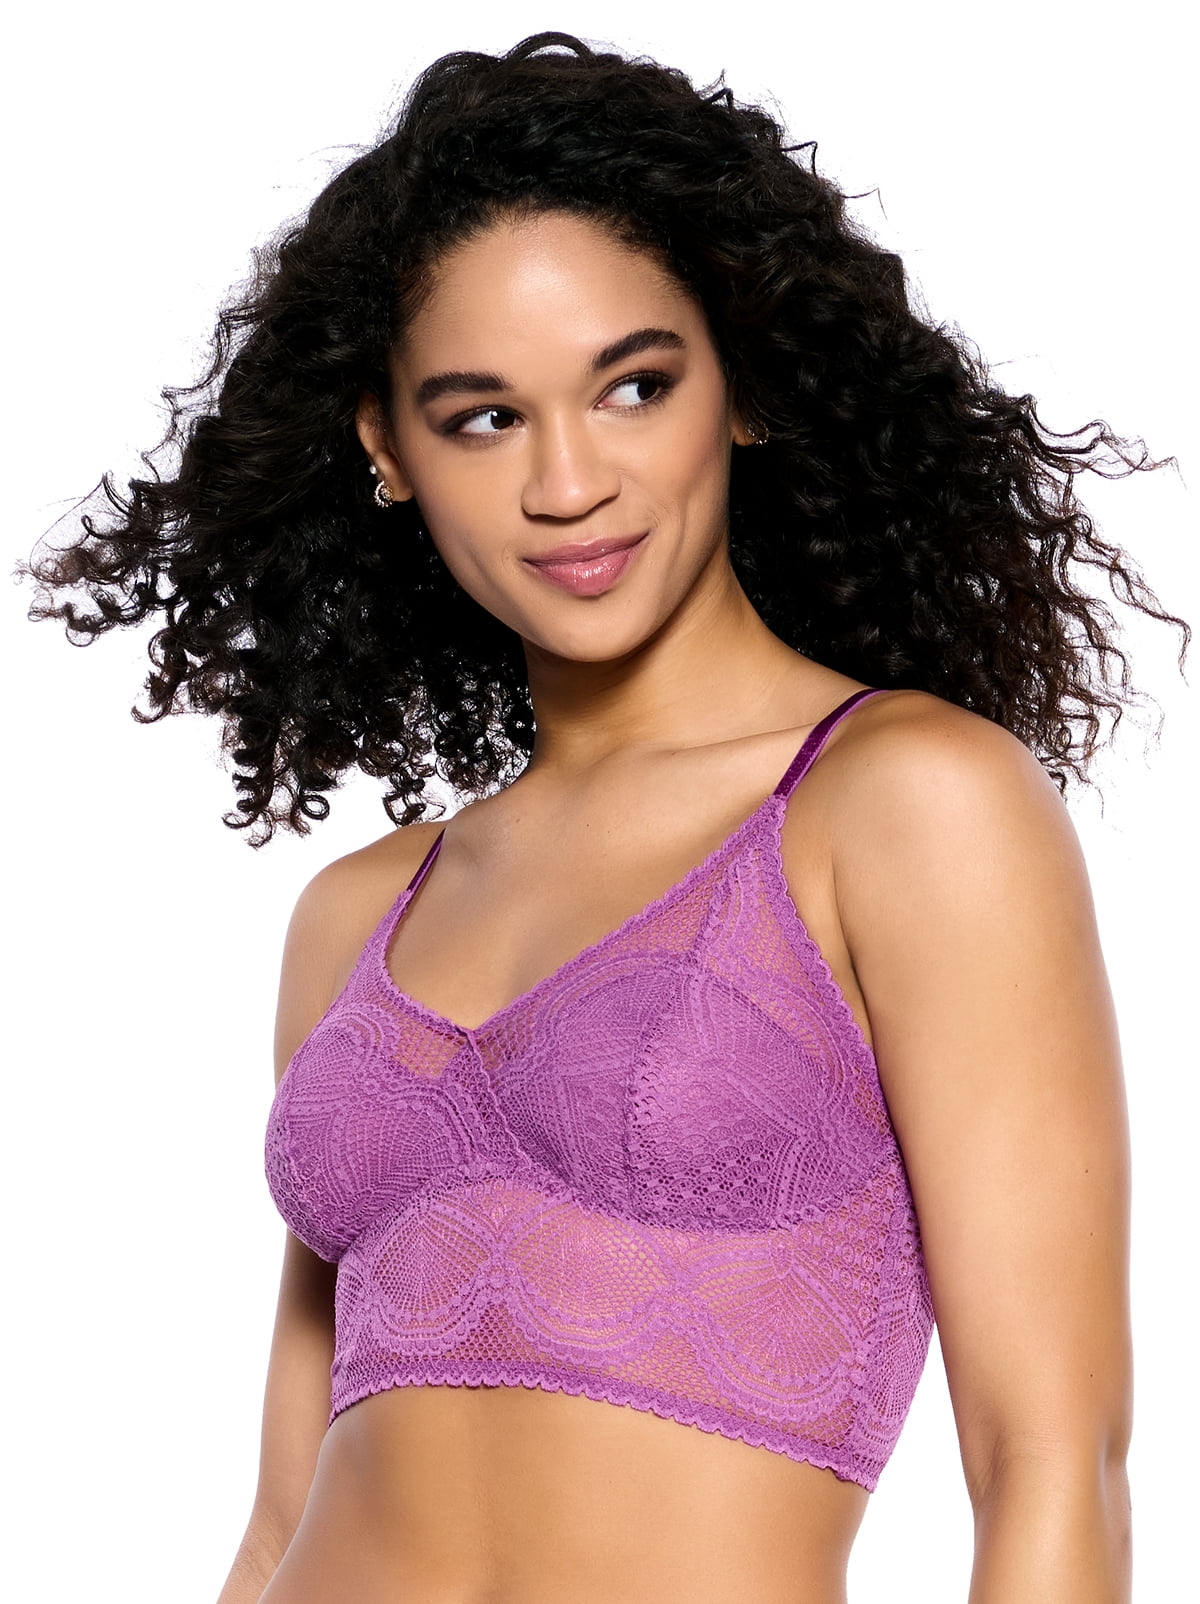 Felina Finesse Cami Bralette - Stretchy Lace Bralettes For Women - Sexy and  Comfortable - Inclusive Sizing, From Small To Plus Size. (Hyacinth, S-M) 